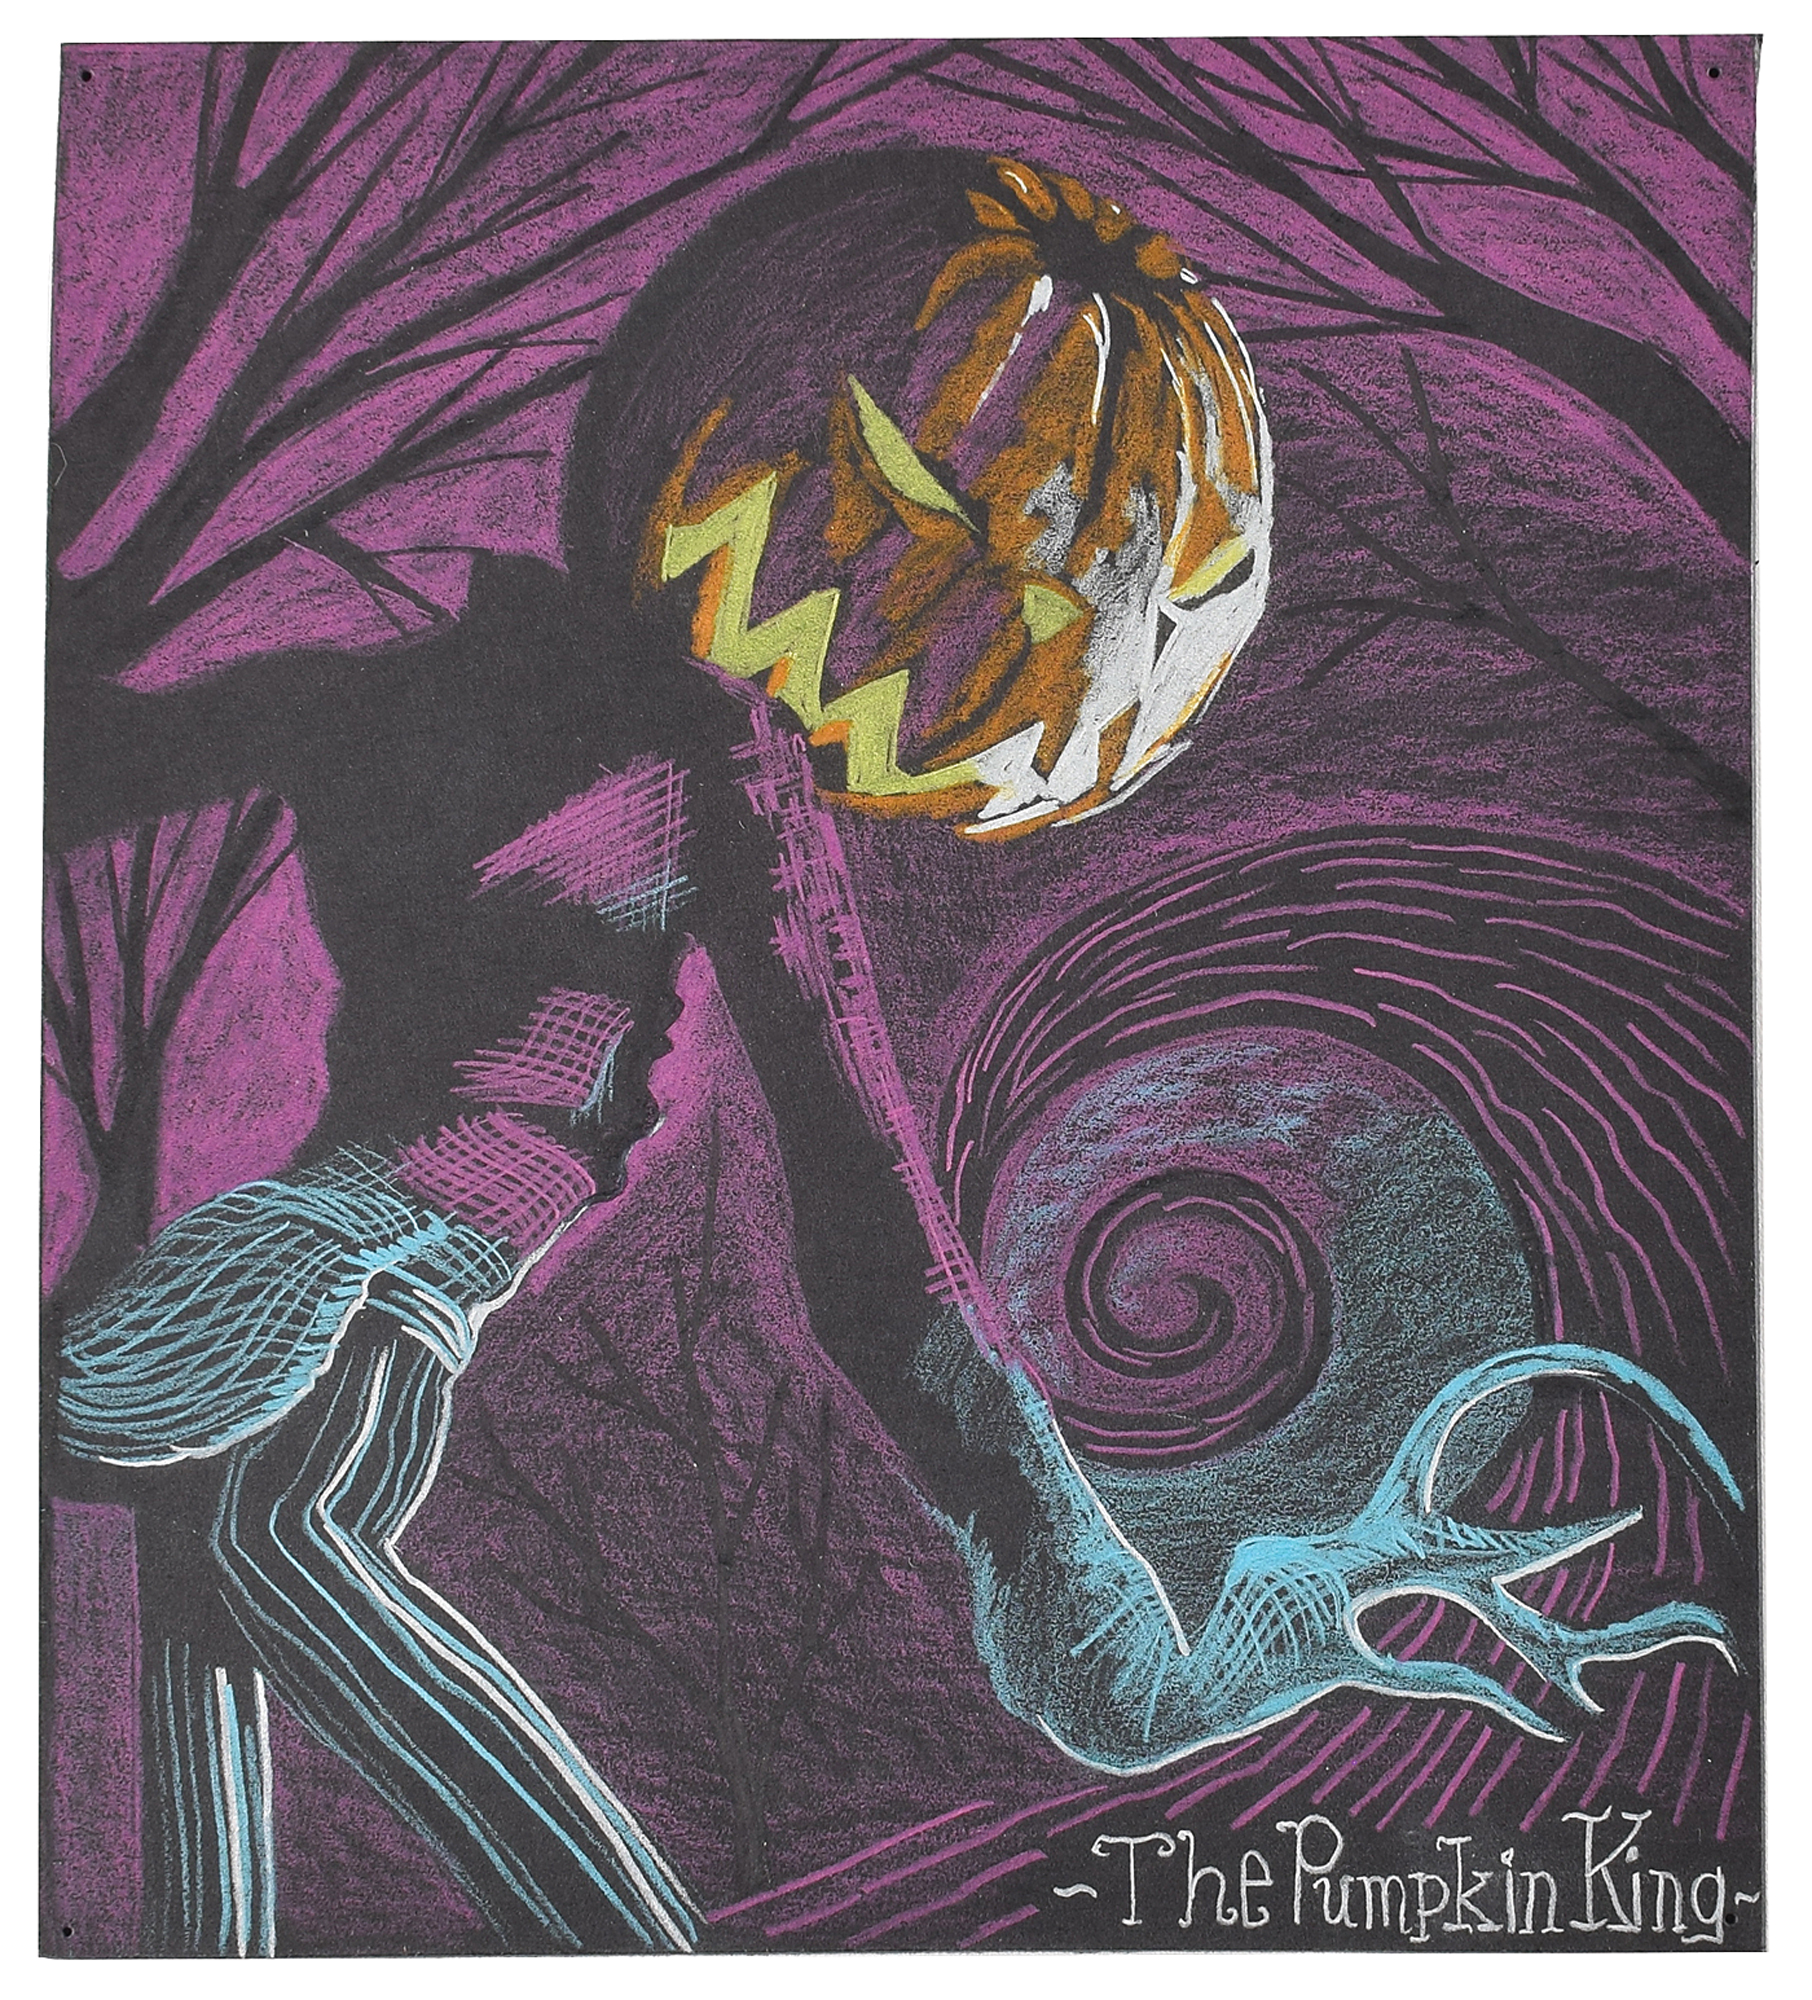 Lot #796 Jack Skellington production concept storyboard painting from Nightmare Before Christmas